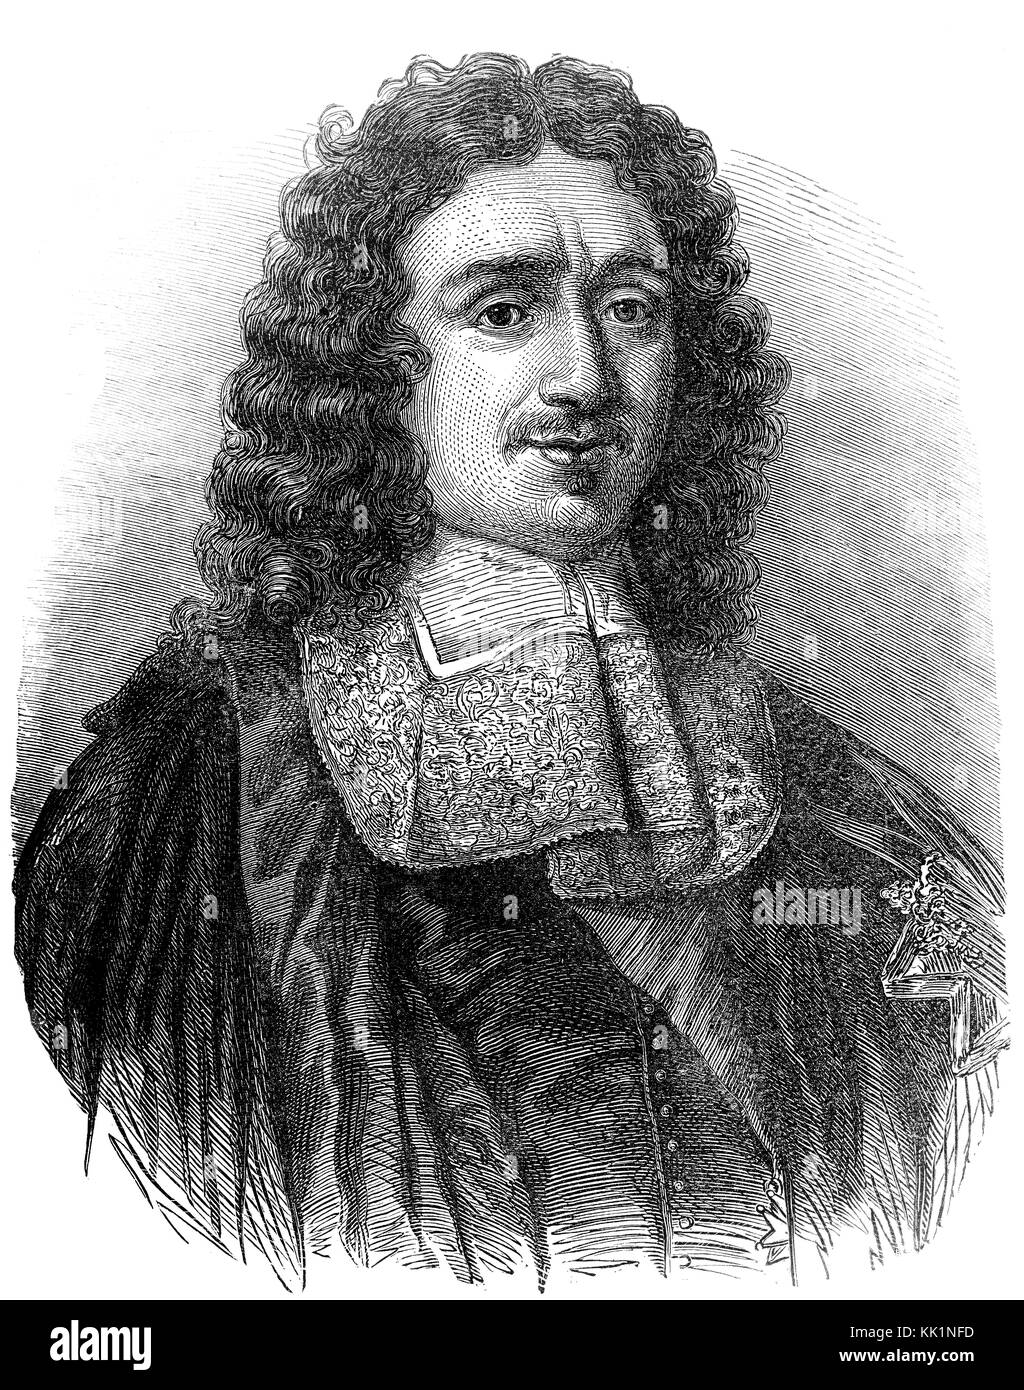 Jean-Baptiste Colbert, Marquis de Seignelay, 1619 - 1683, a French statesman and finance minister Stock Photo